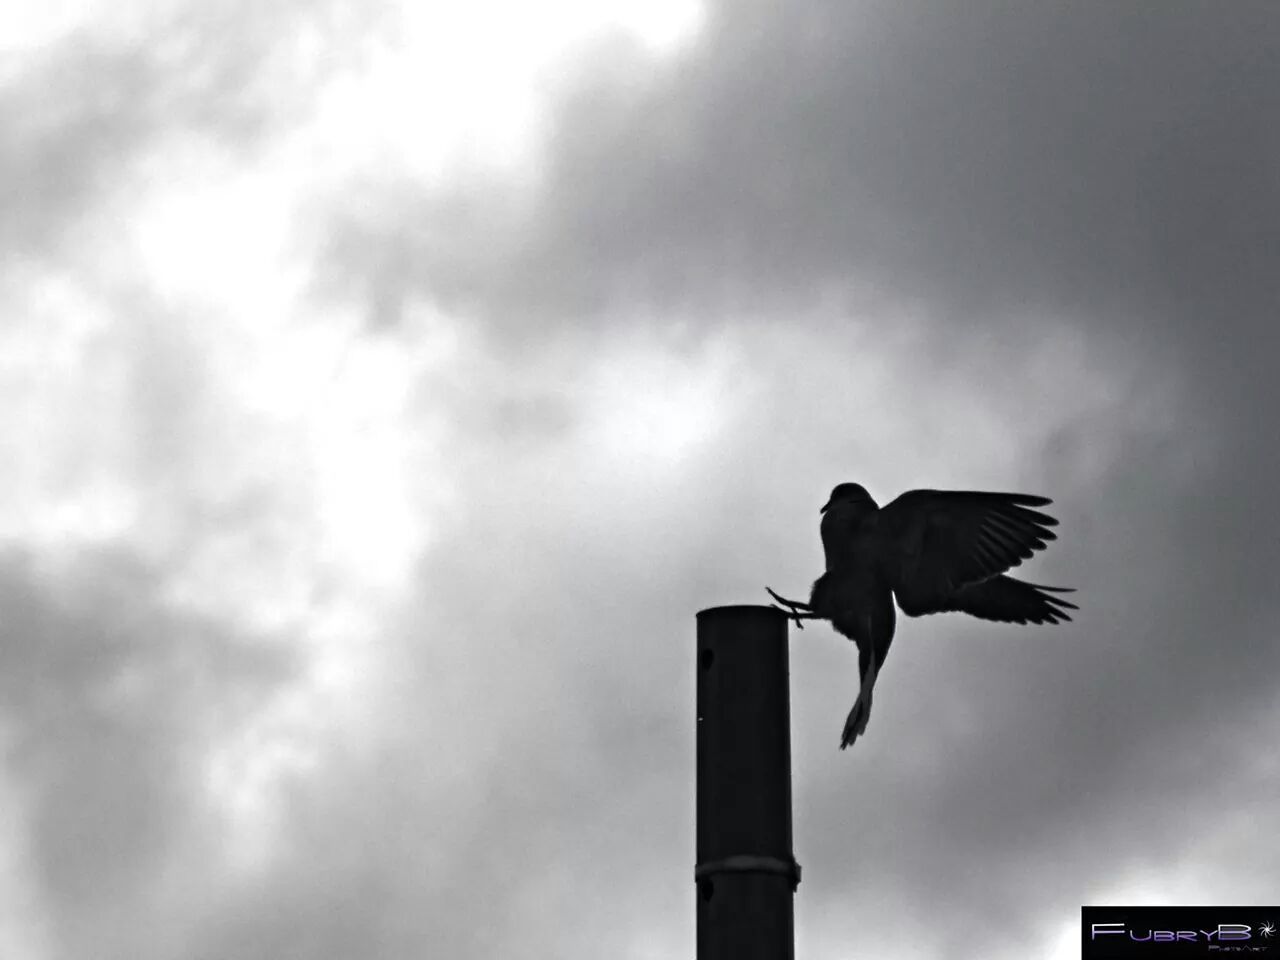 bird, animal themes, low angle view, animals in the wild, sky, wildlife, perching, one animal, cloud - sky, cloudy, silhouette, cloud, spread wings, nature, pigeon, seagull, day, pole, outdoors, flying